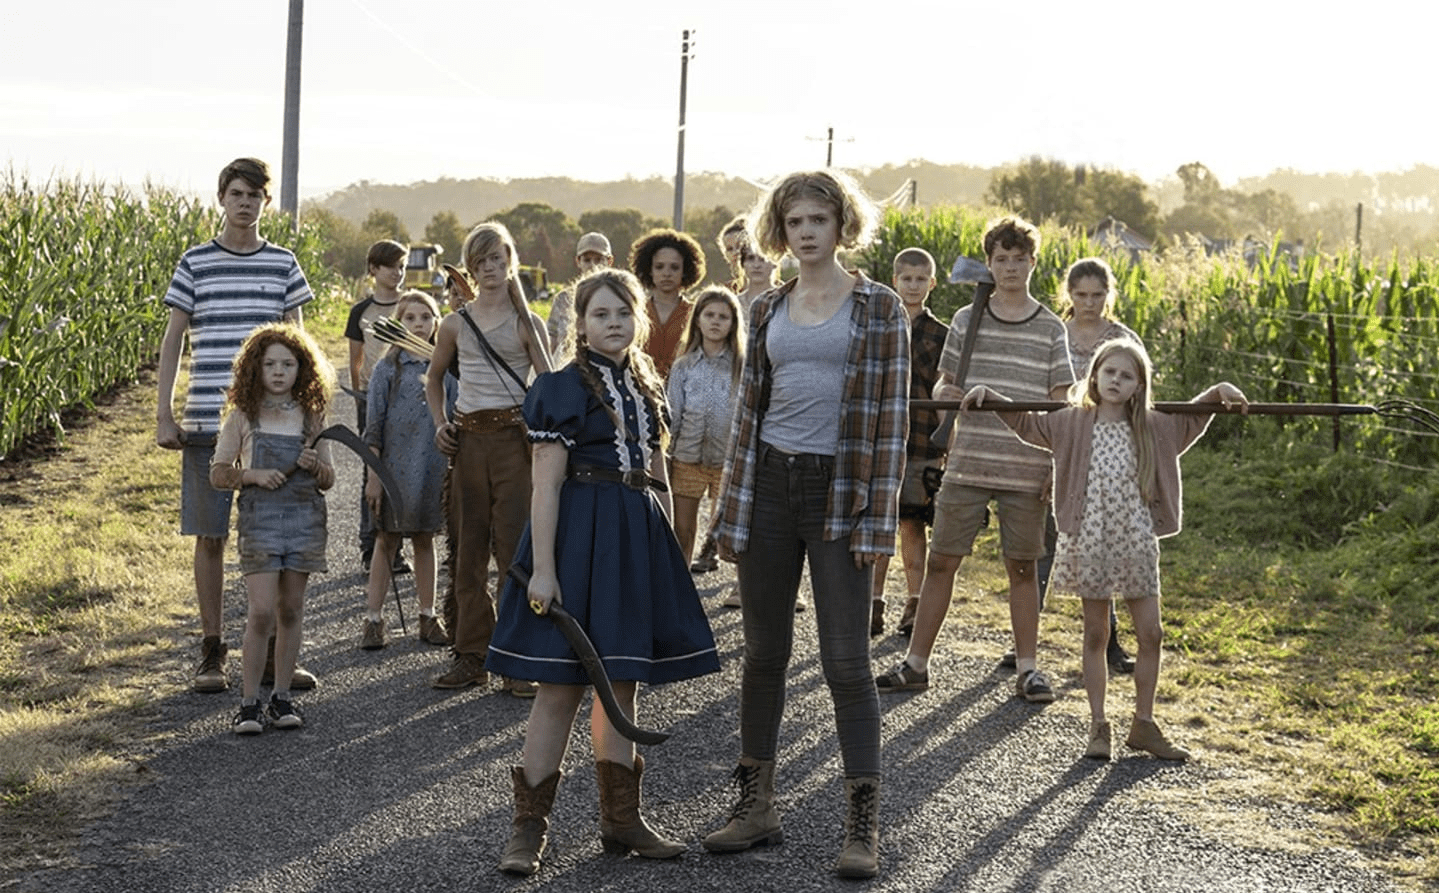 Children Of The Corn: First Look At The New Version